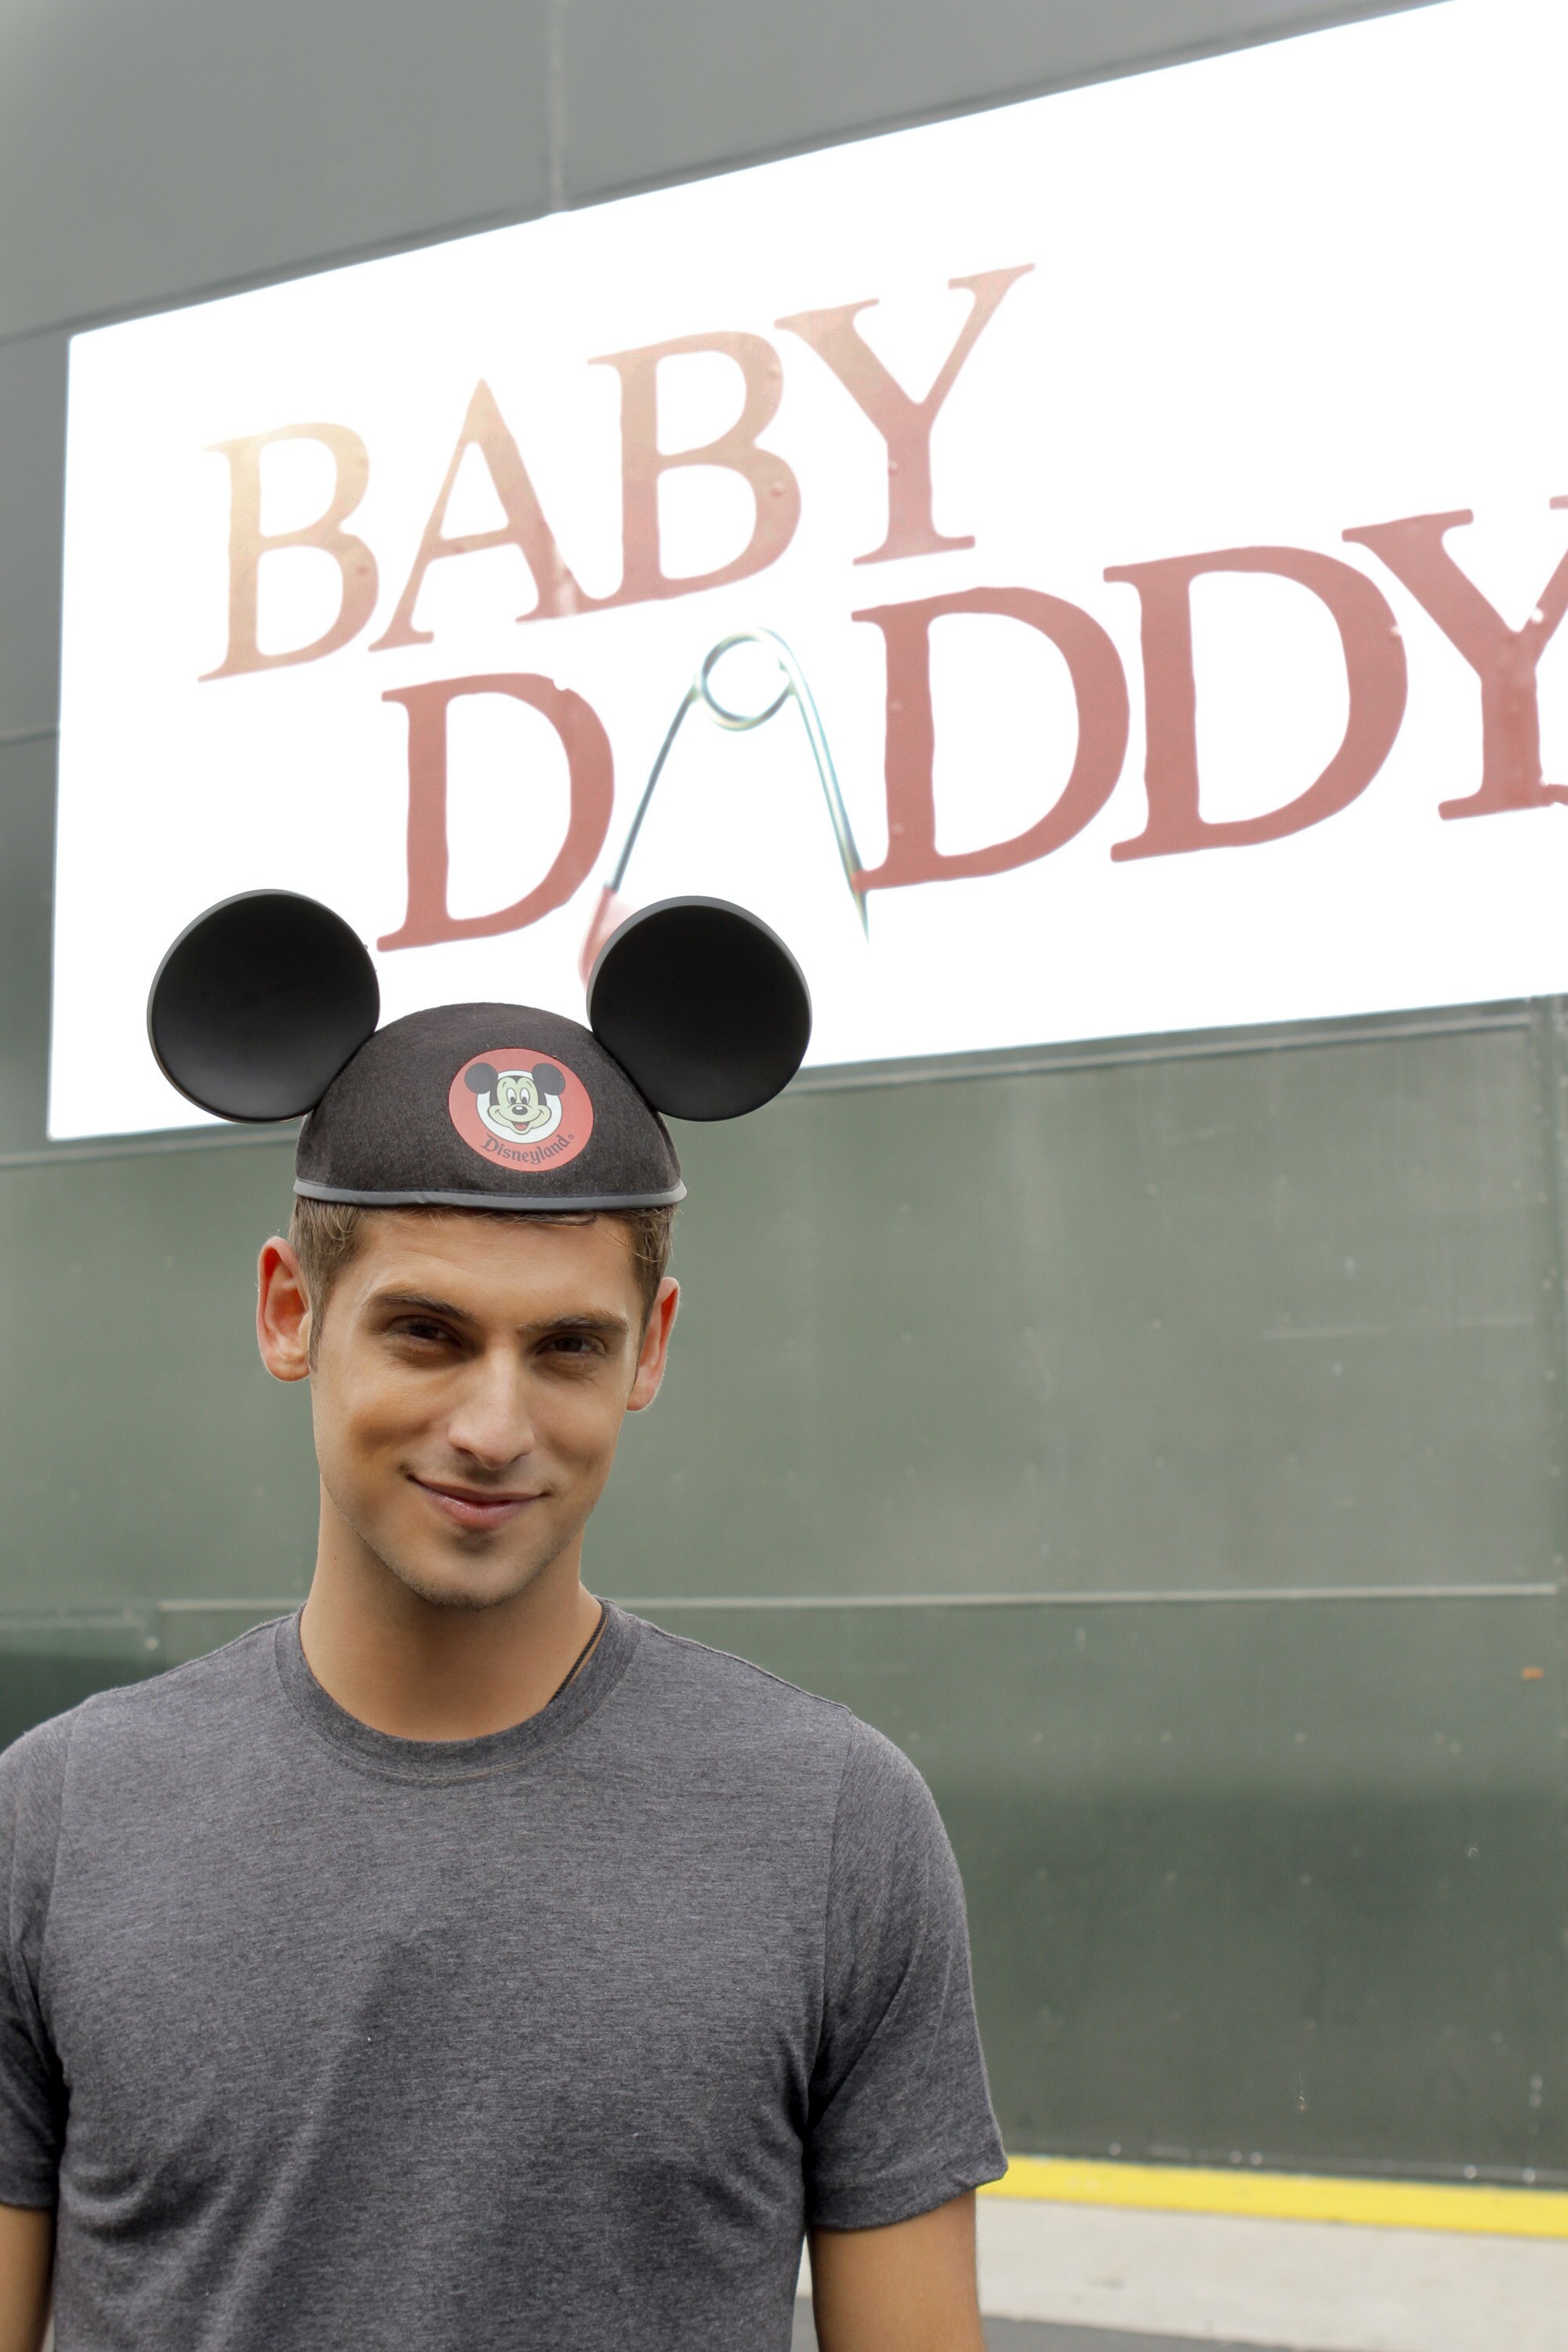 Jean-Luc Bilodeau from ABC Family's "Baby Daddy". Don't miss the ALL NEW Baby Daddy Christmas Spe...